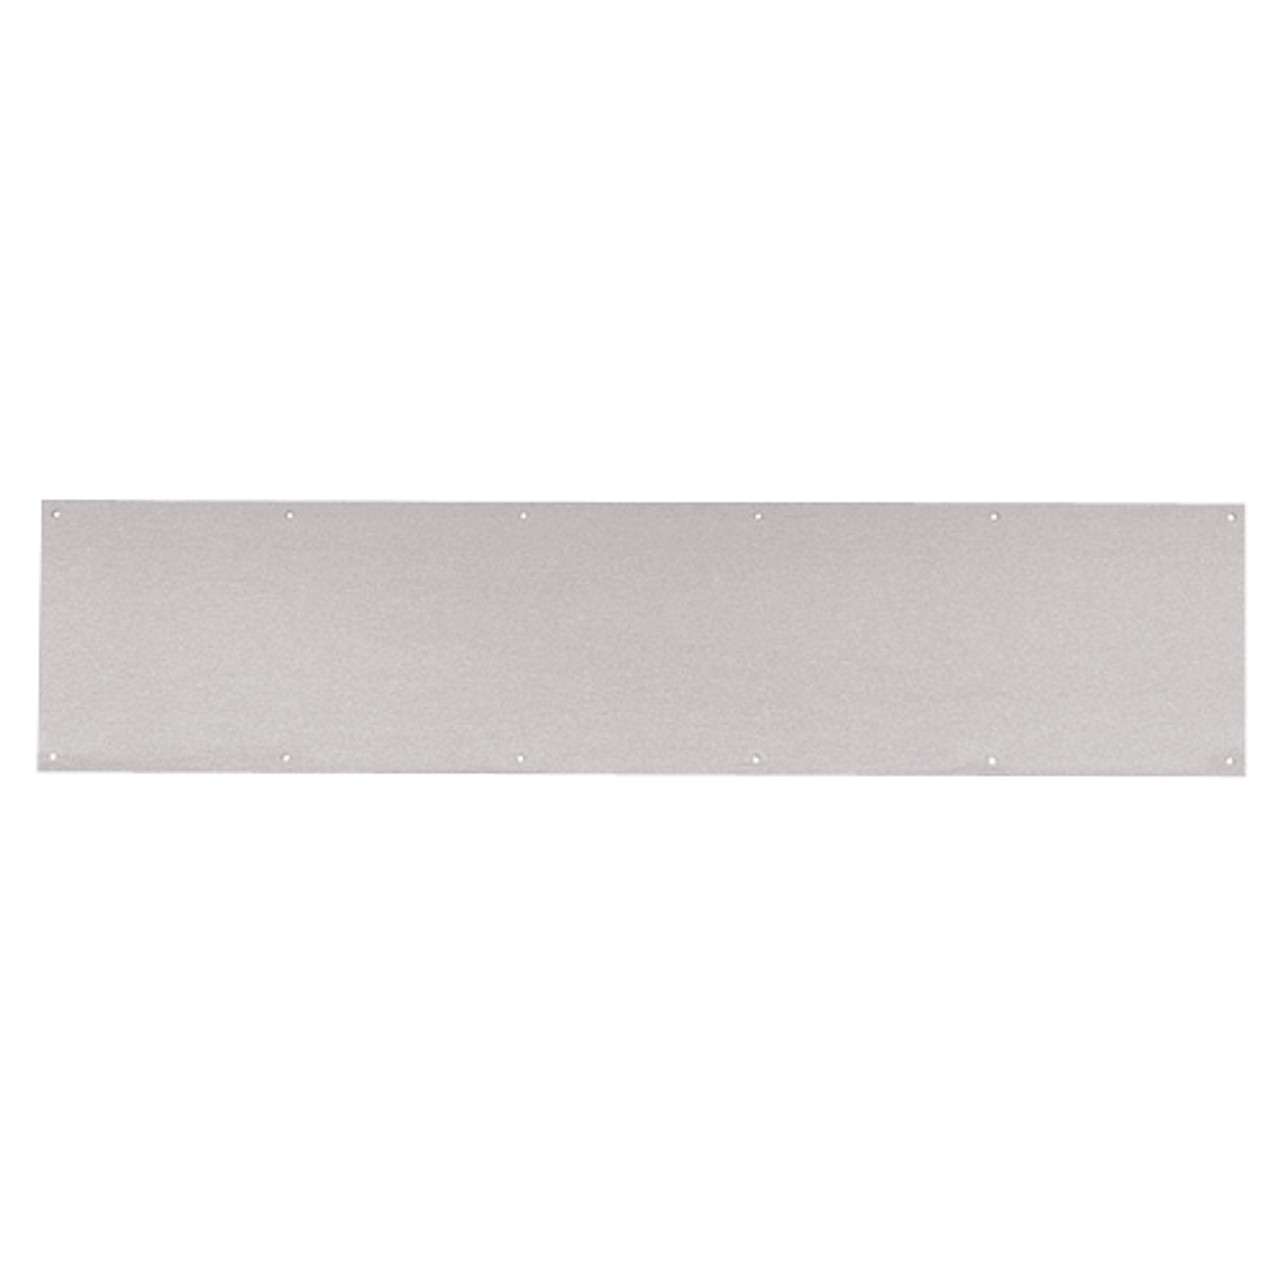 8400-US32D-24x34-B-CS Ives 8400 Series Protection Plate in Satin Stainless Steel